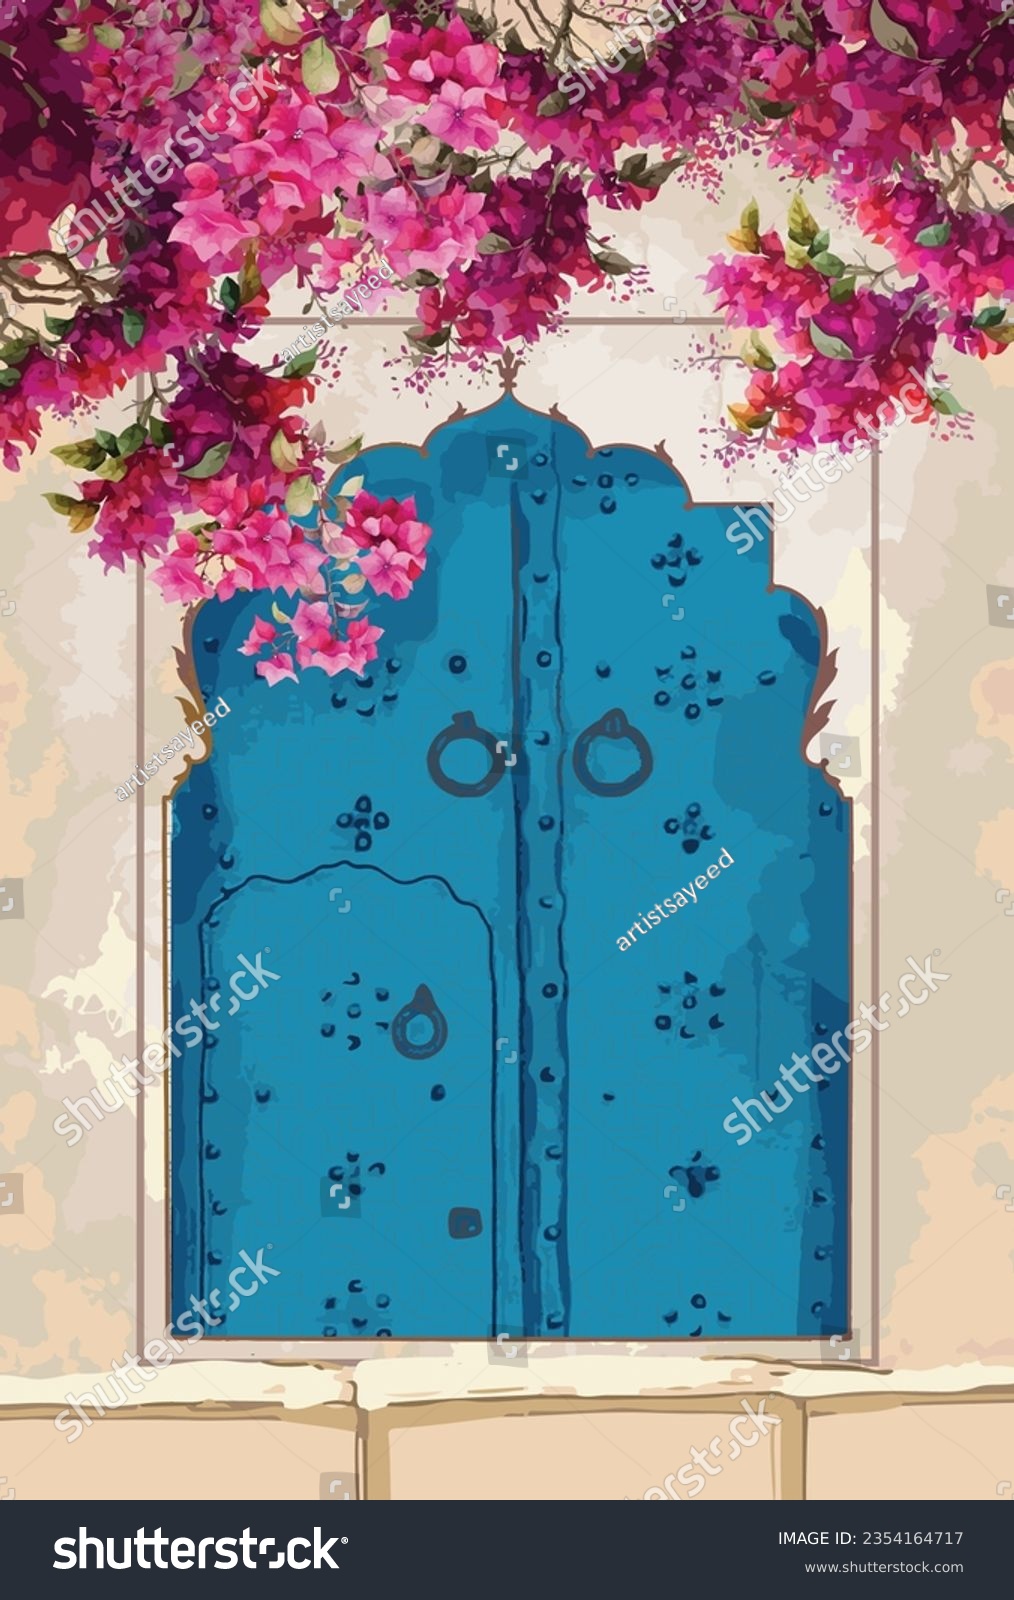 SVG of Moroccan ethnic door pattern with watercolor bougainvillea flowers illustration for wall art svg